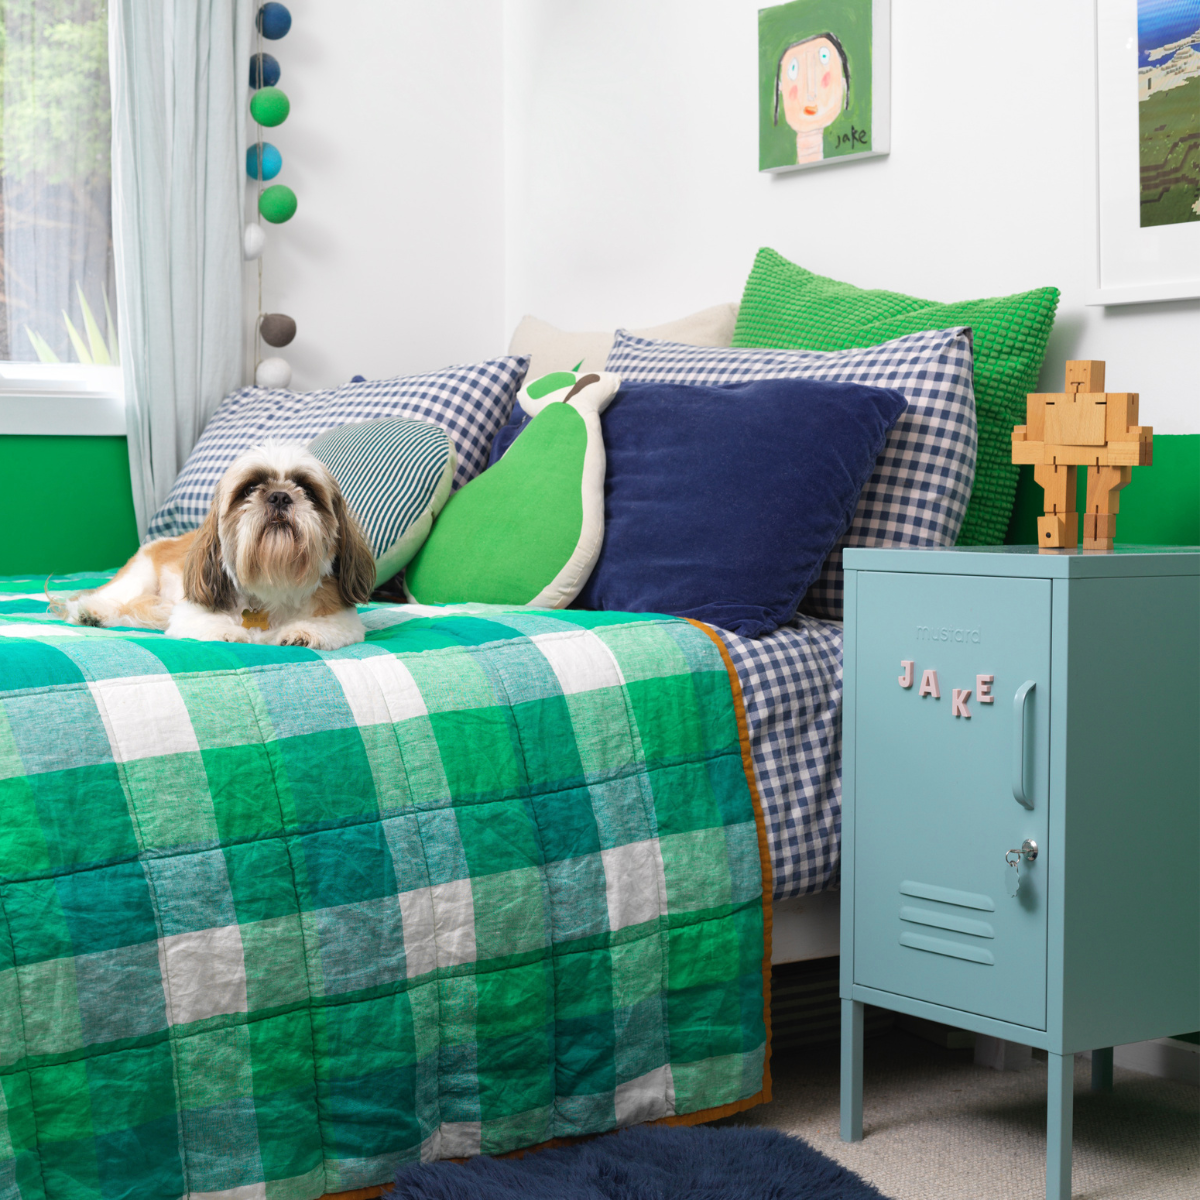 An Ocean Shorty sits next to the bed in a room painted vivid apple green and white. The bedding combines navy gingham with bright green patterns and a whimsical pear cushion, and there is a dog on the bed.